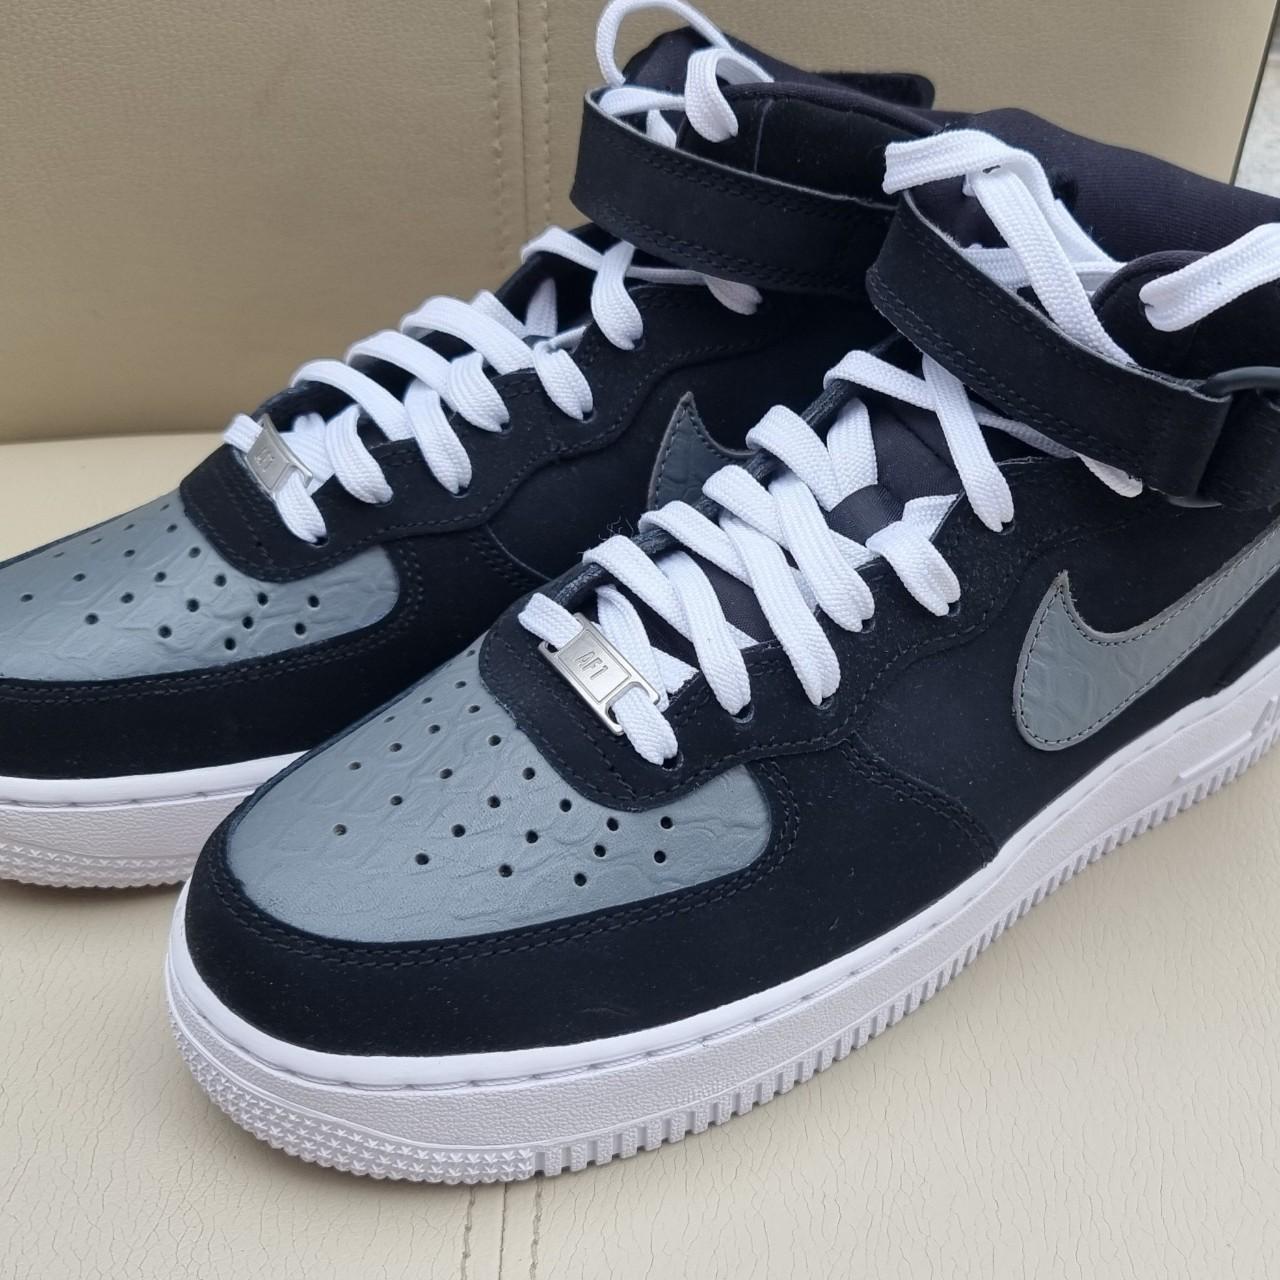 NIKE AIRFORCE 1 MID 07 TRAINER COMES IN BLACK AND... - Depop